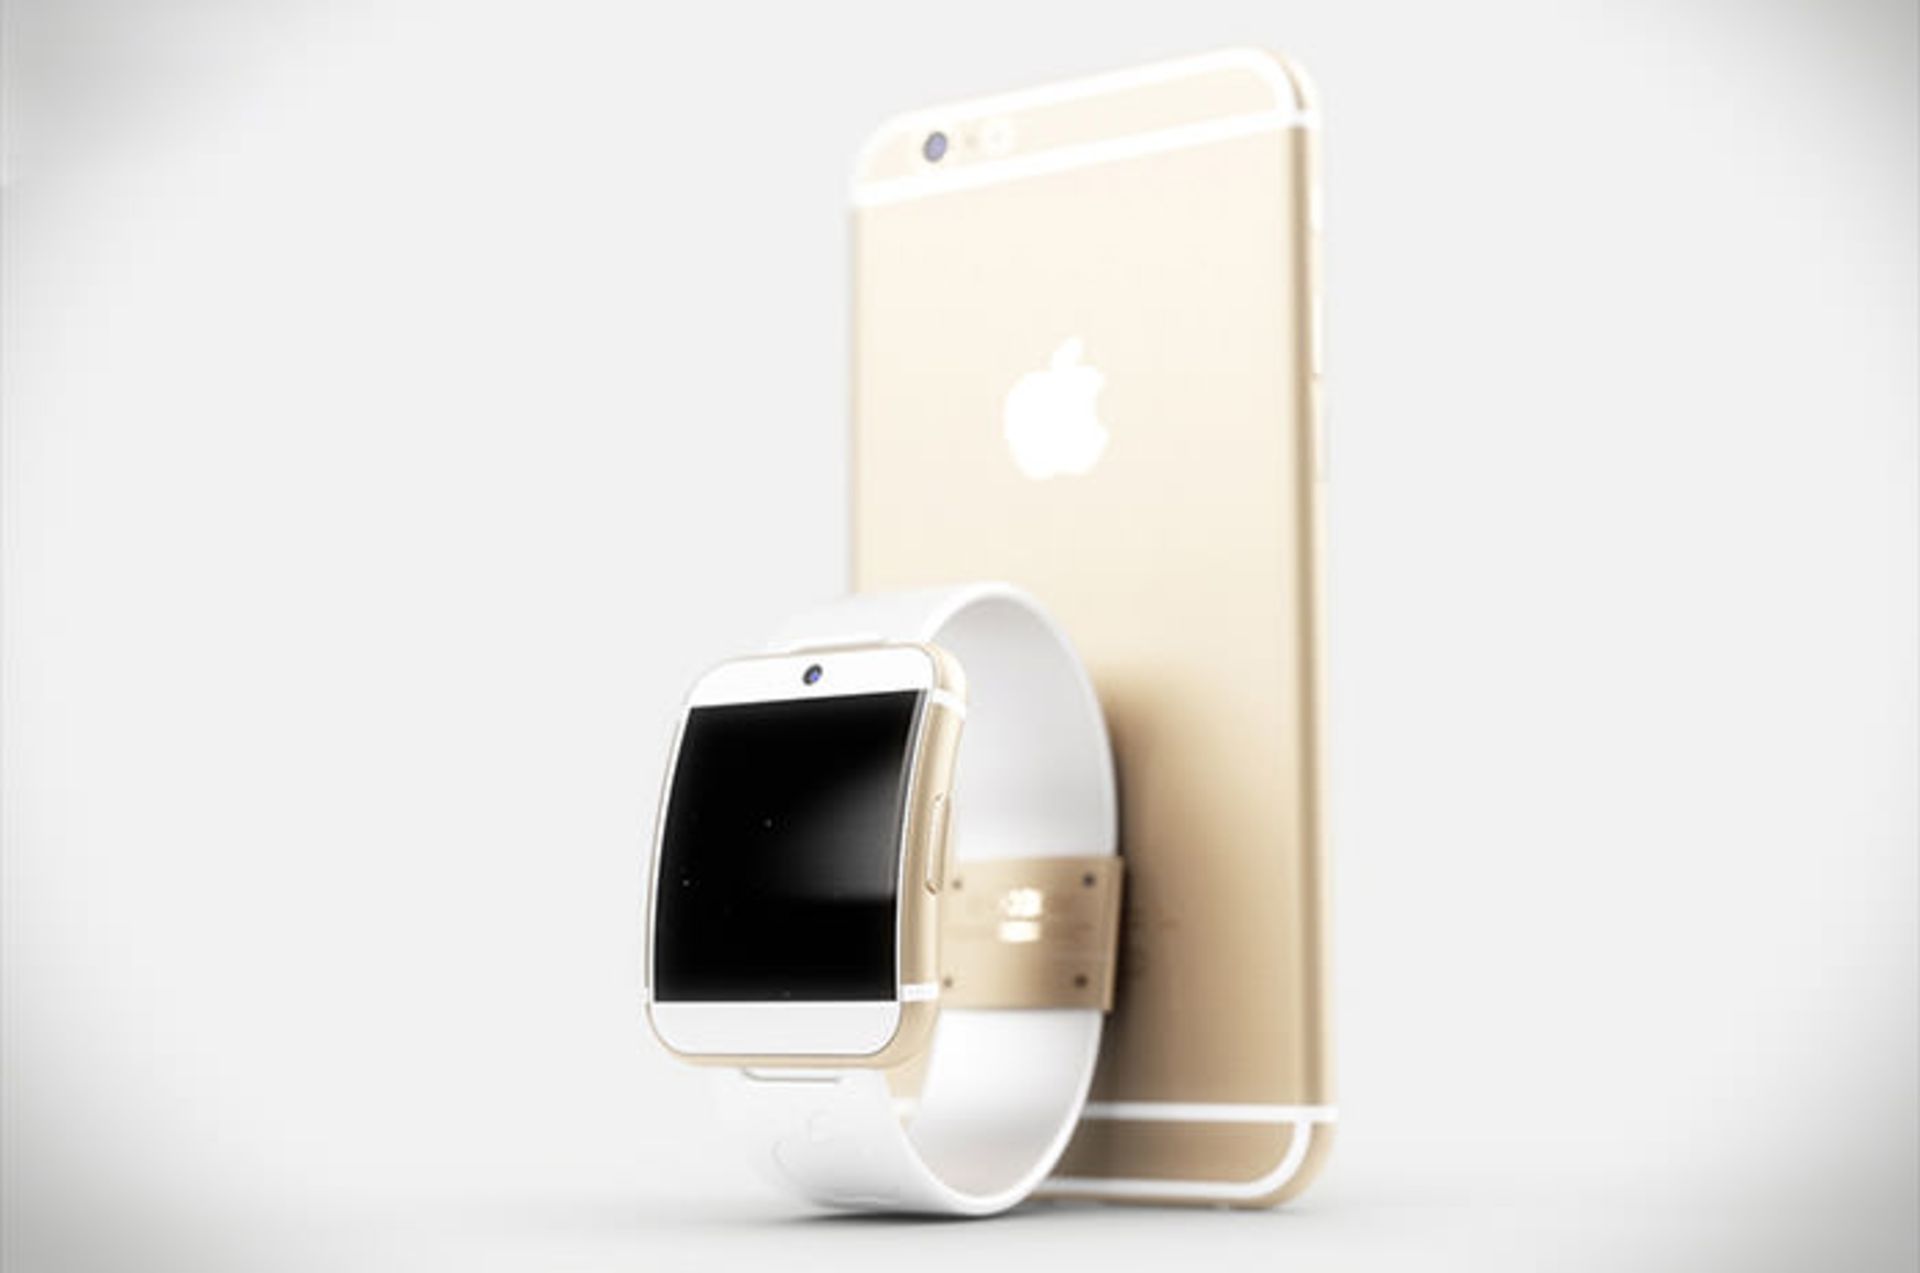 1Apple-iWatch-concept-shows-dreamy-curves-iPhone-esque-looks